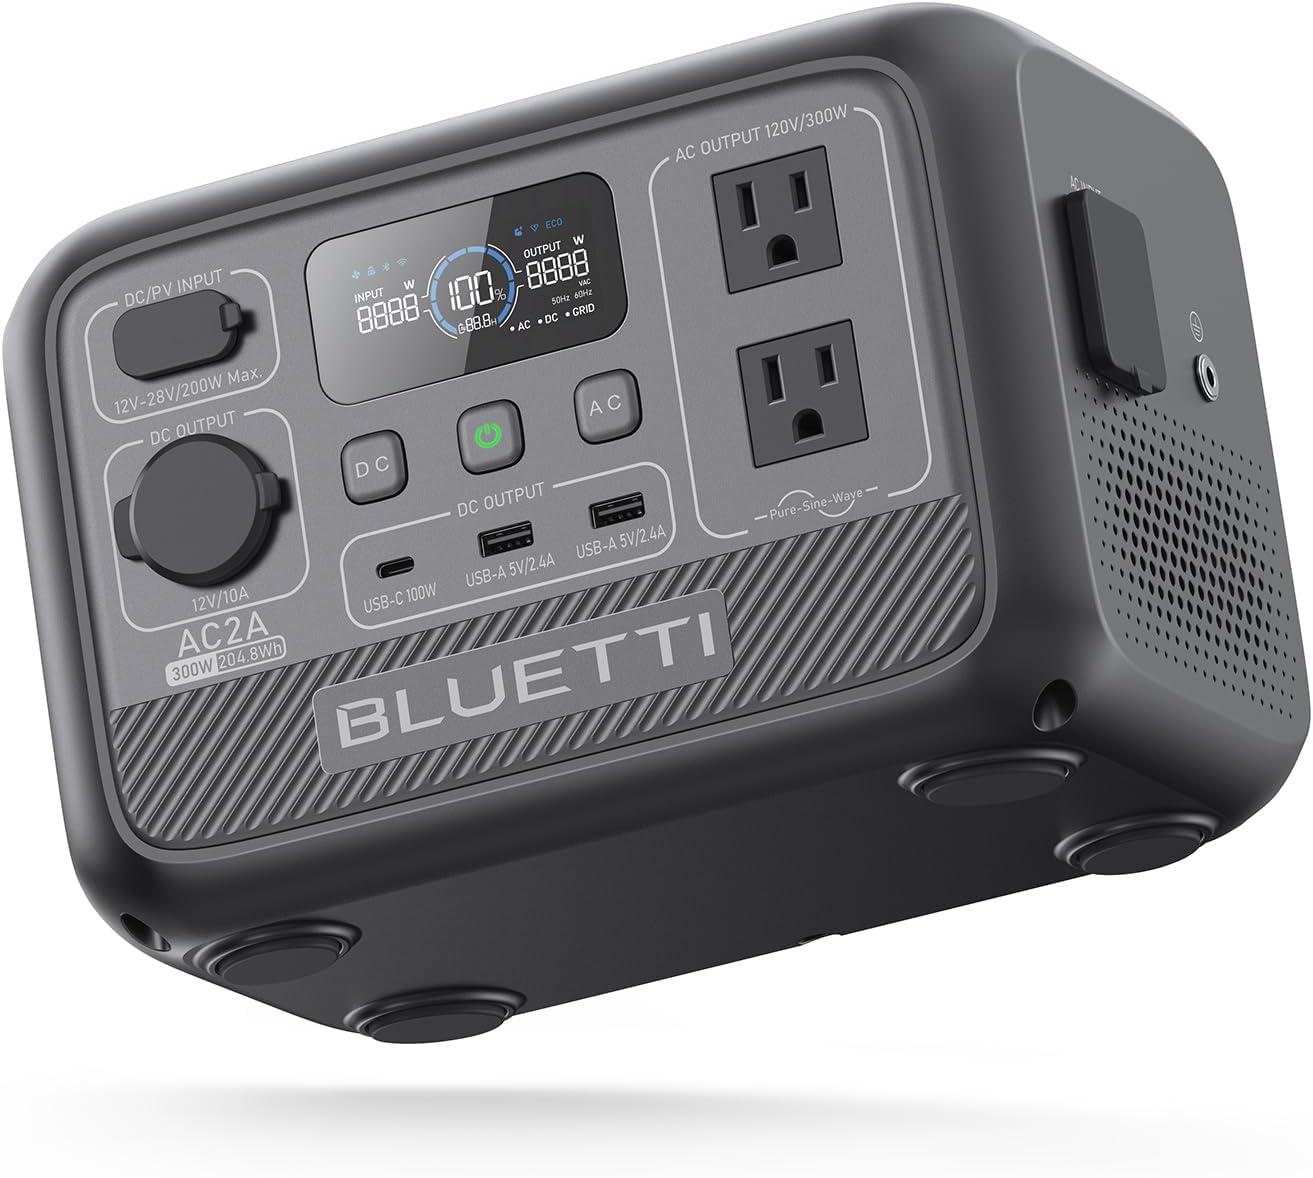 Bluetti Portable Power Station AC2A 204Wh LiFePO4 Battery Backup for $149 Shipped